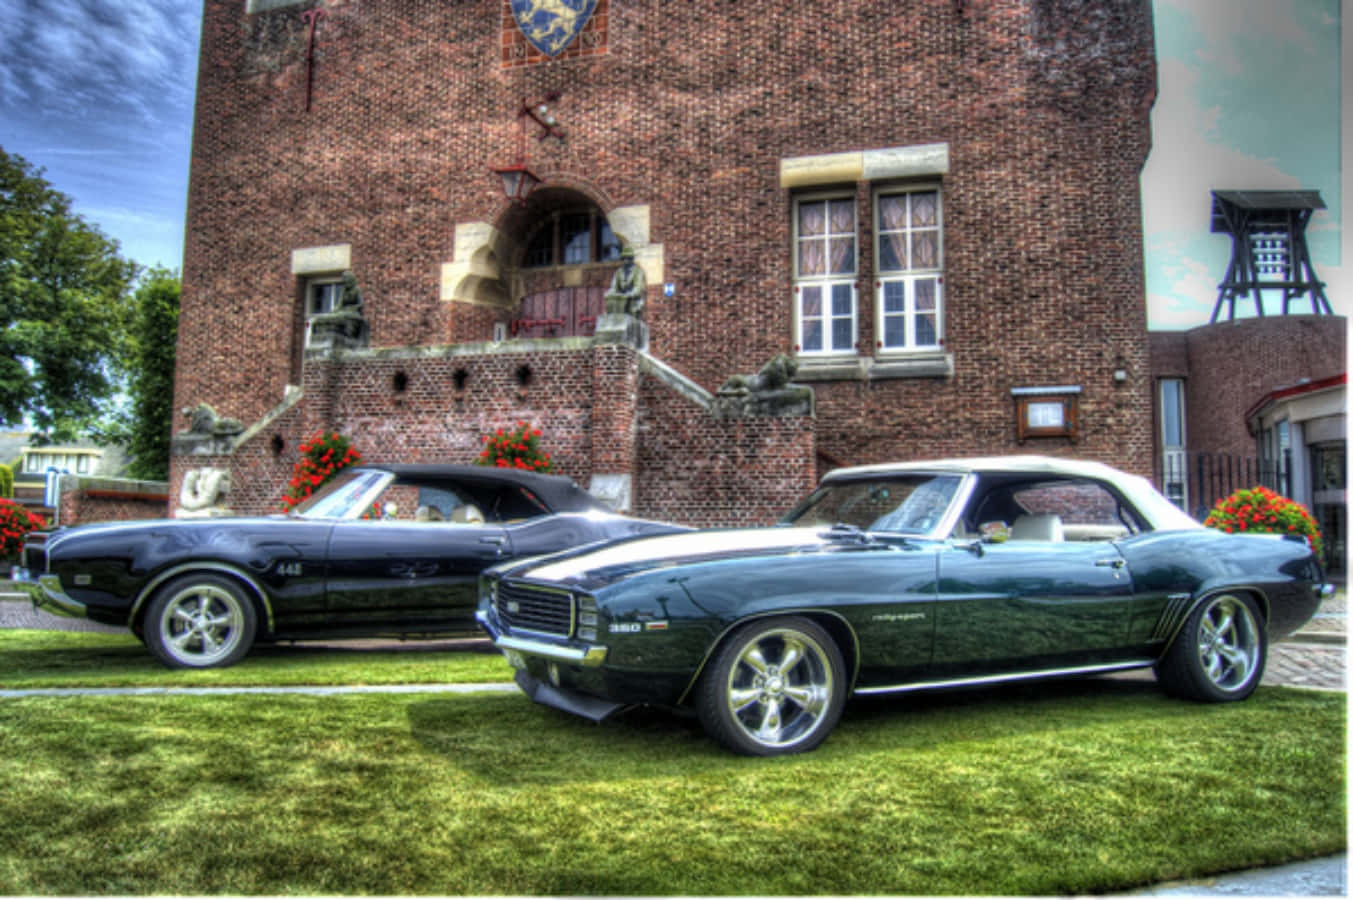 Two Cars Parked In Front Of A Brick Building